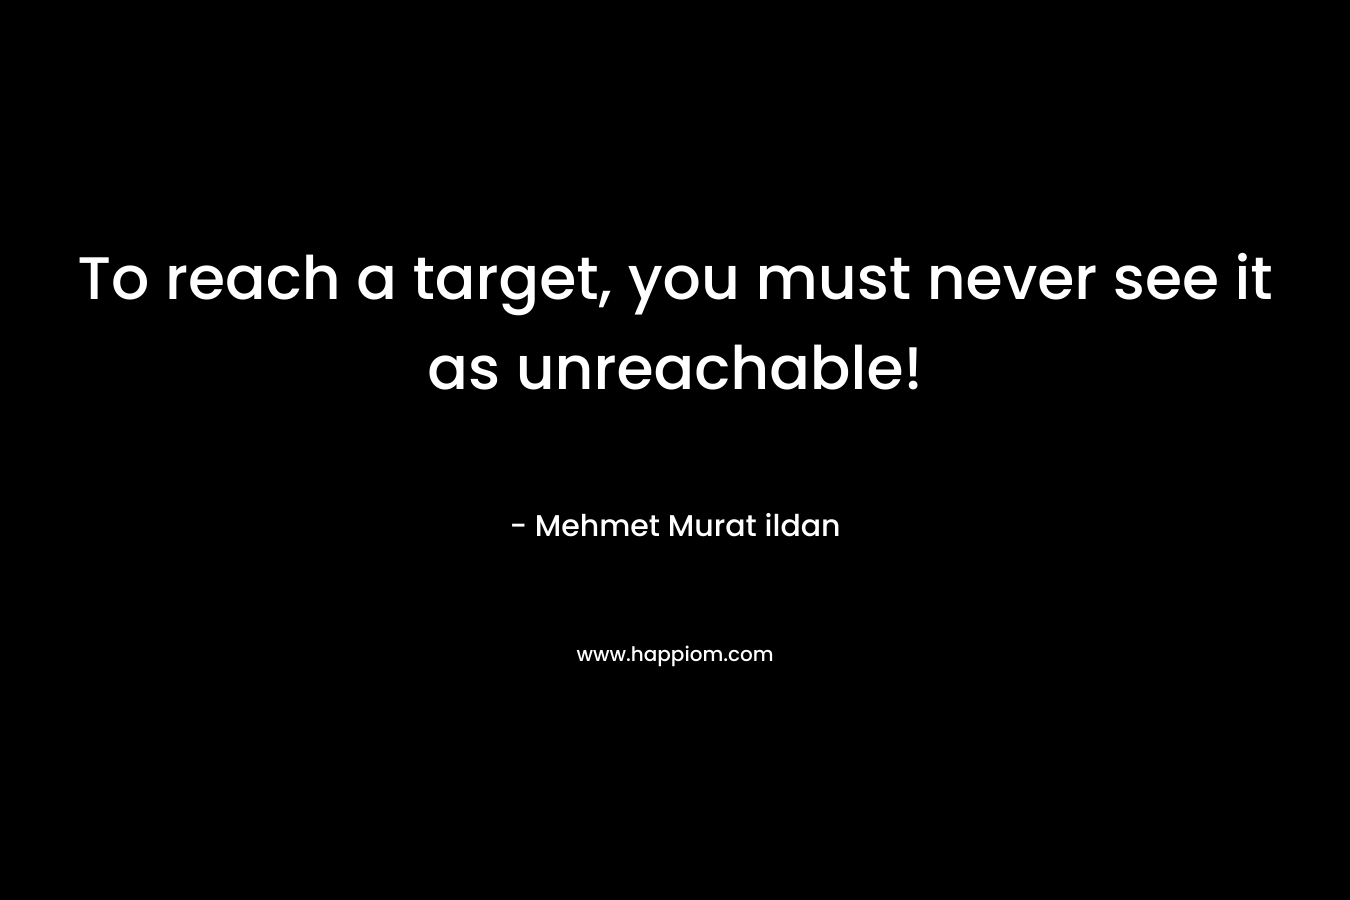 To reach a target, you must never see it as unreachable!